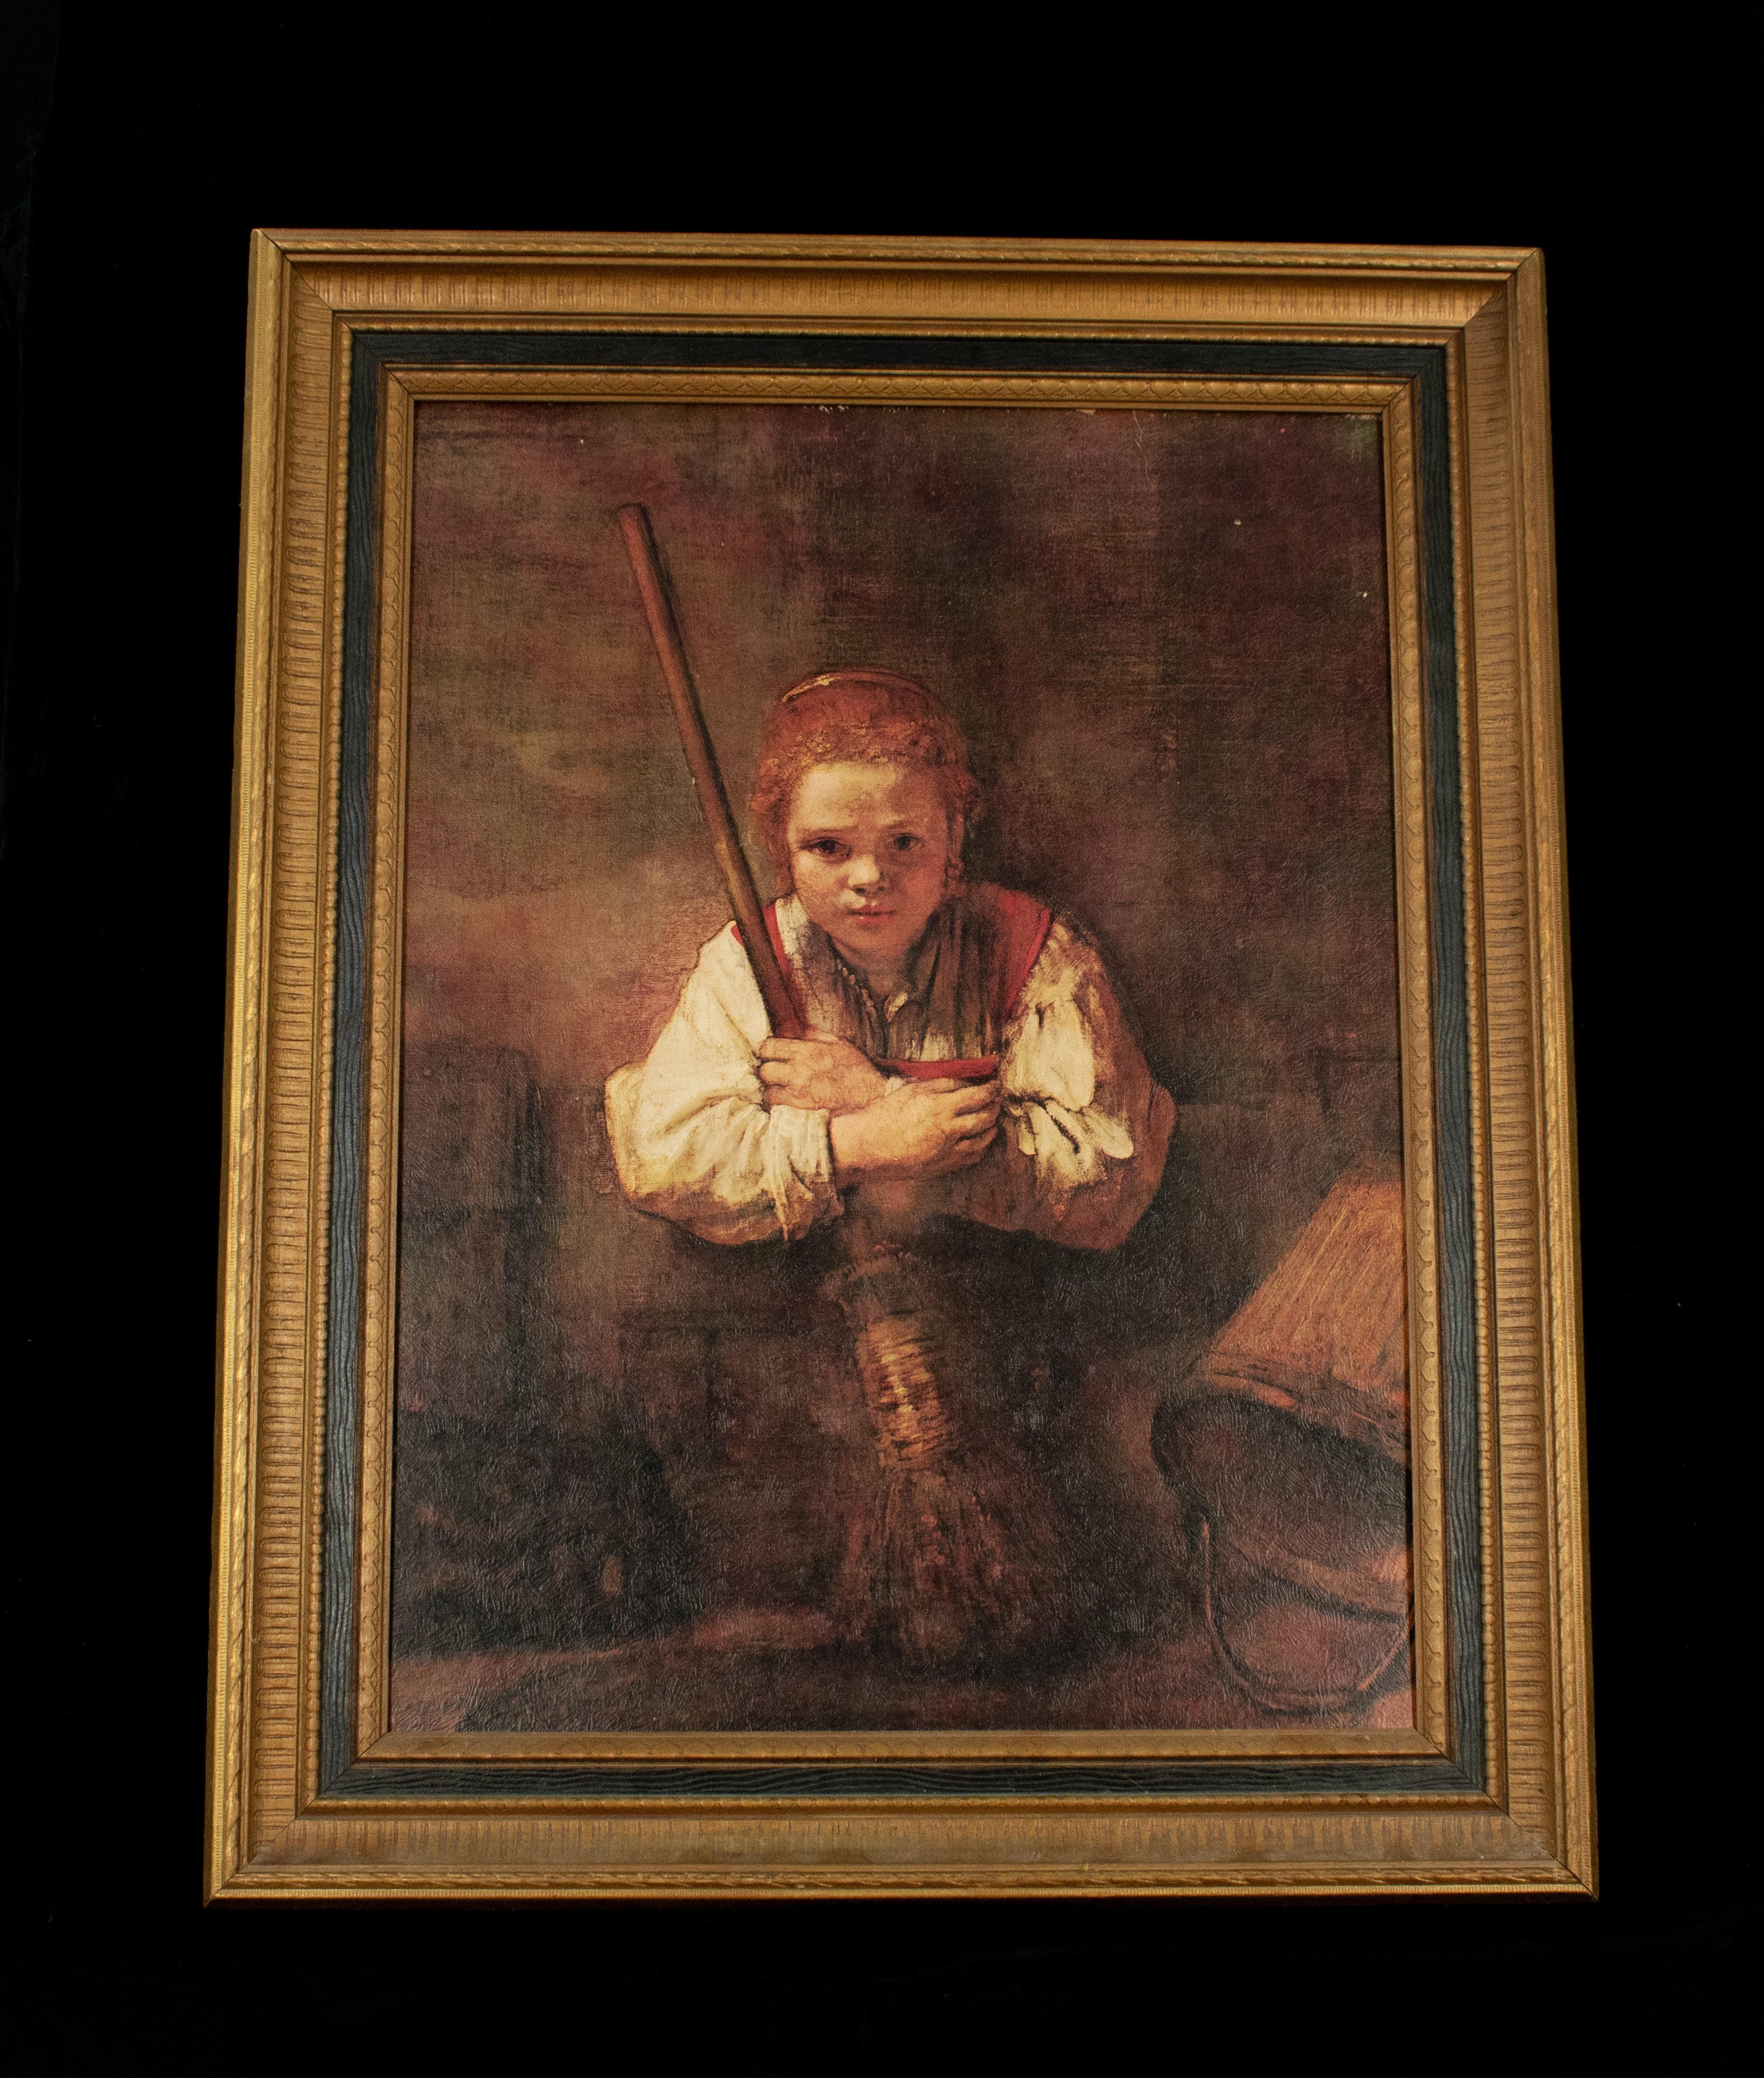 A Girl with a Broom 1651 Reprint Framed 23x29 Signed and Dated